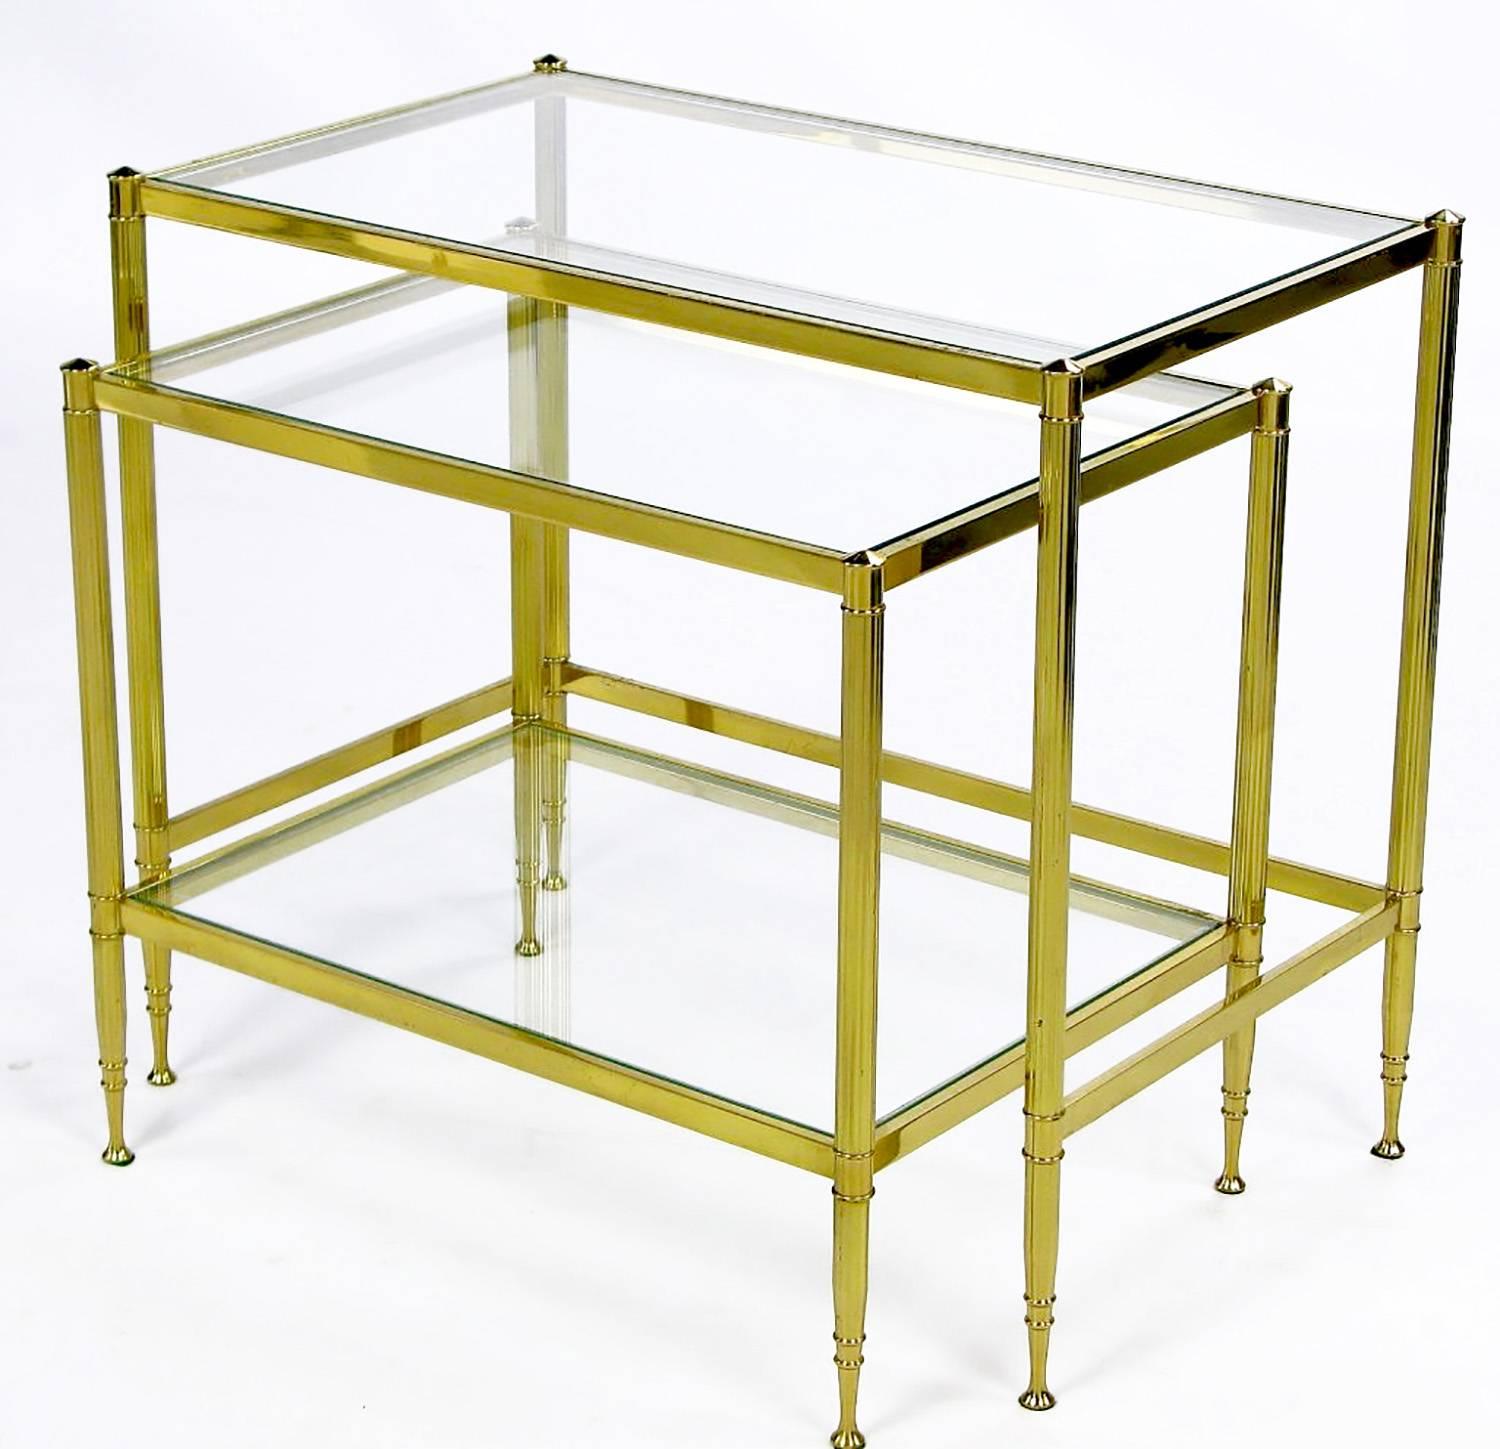 Polished brass nesting tables with double ferrule detailing that begins at the top of each leg and continues to the beautifully shaped feet. The smaller nested table has both a glass top and lower glass shelf.
Smaller table: 18.50